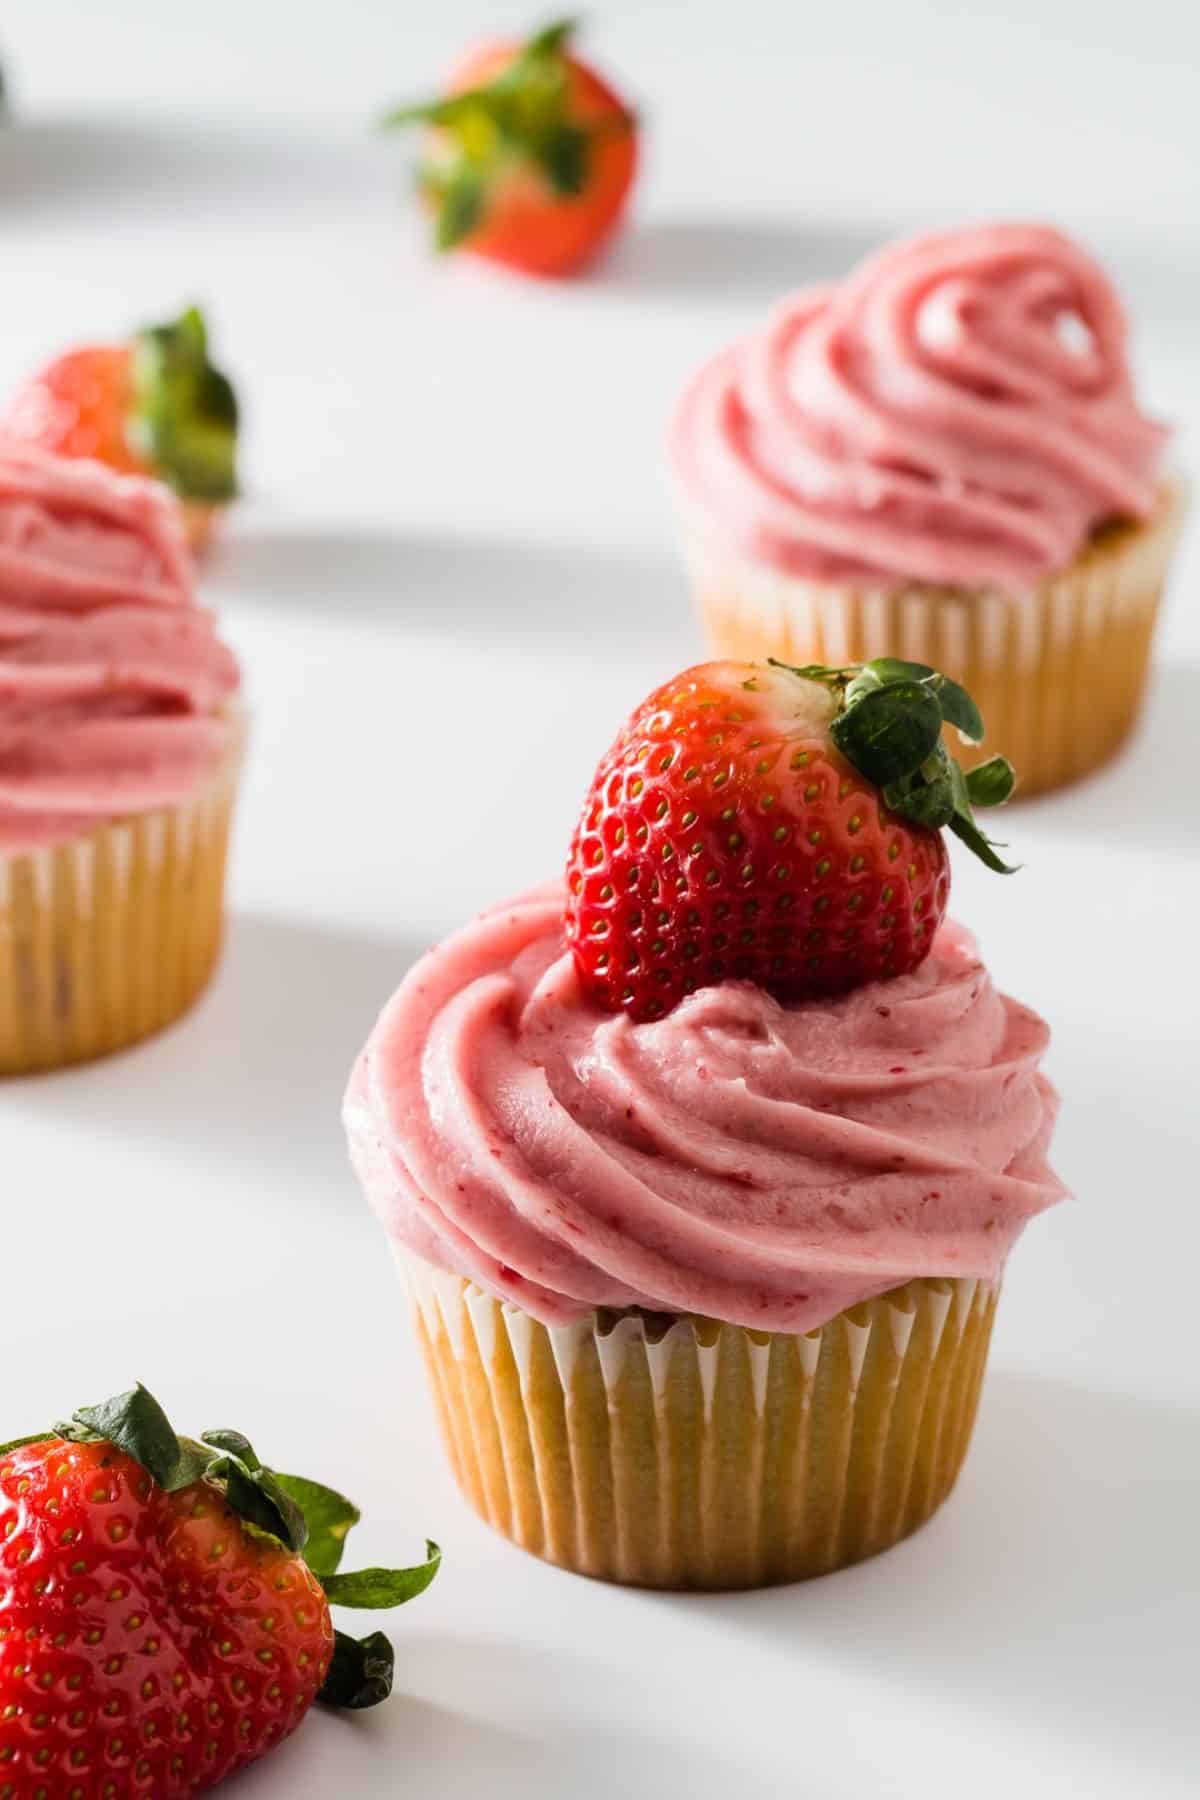 Strawberry Cream Cheese Frosting on cupcakes.